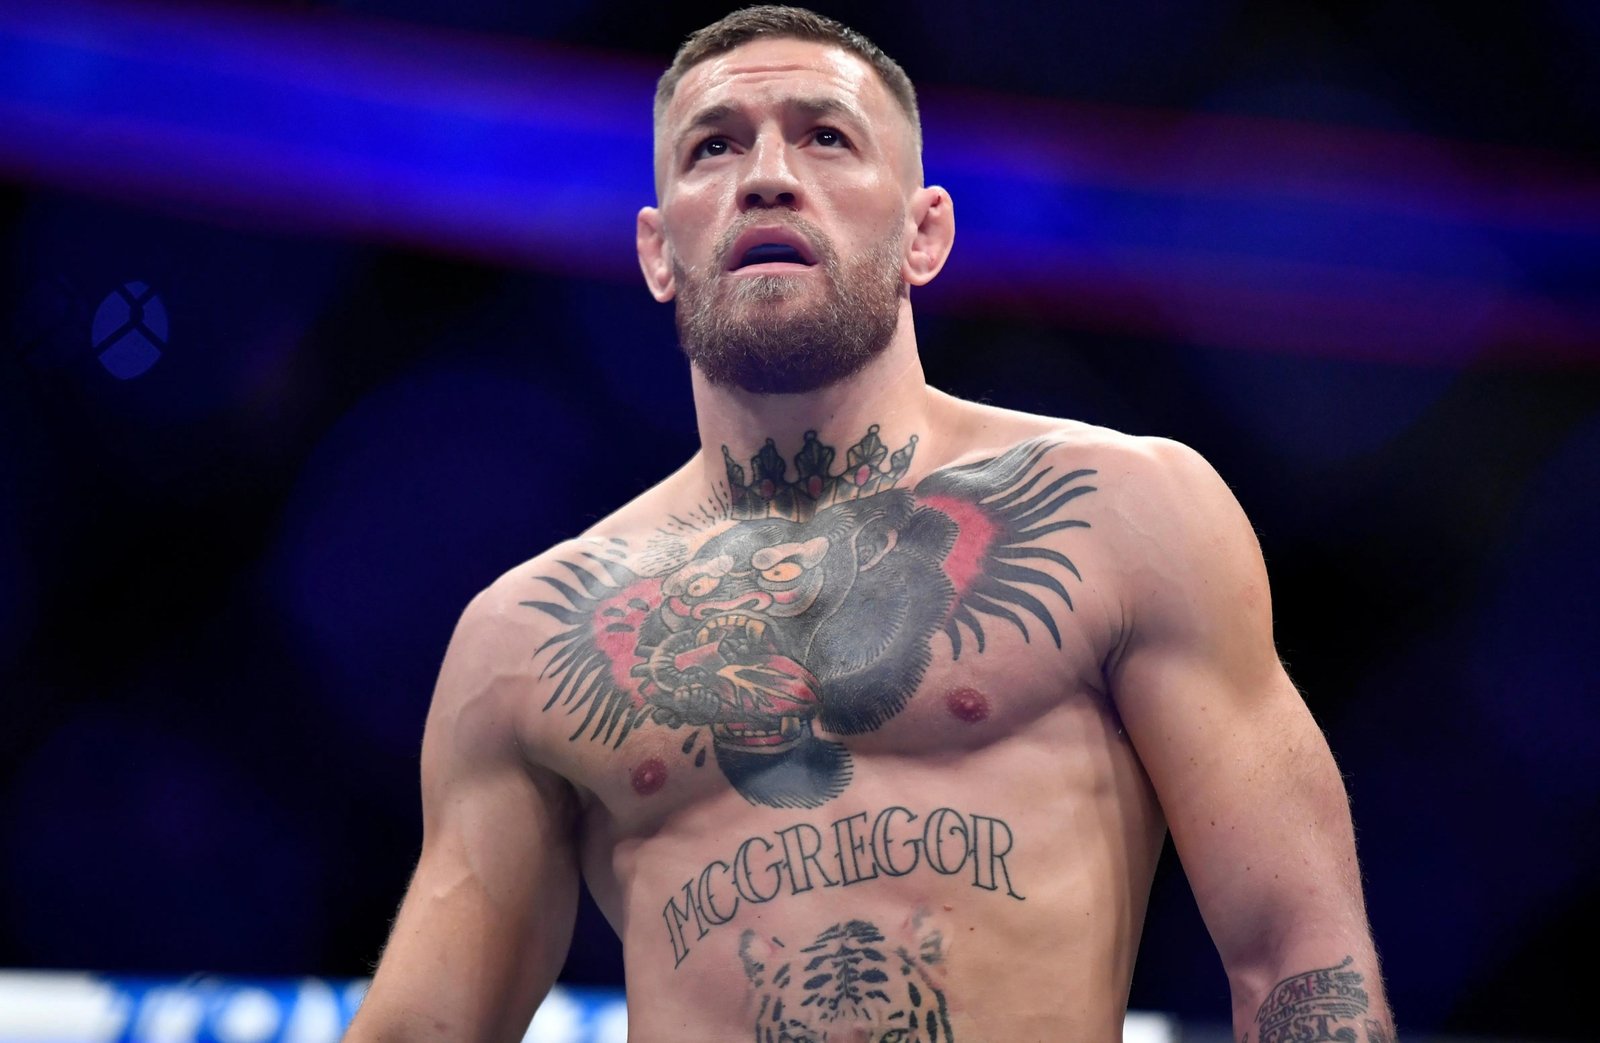 McGregor's unpredictable fighting techniques and mental game